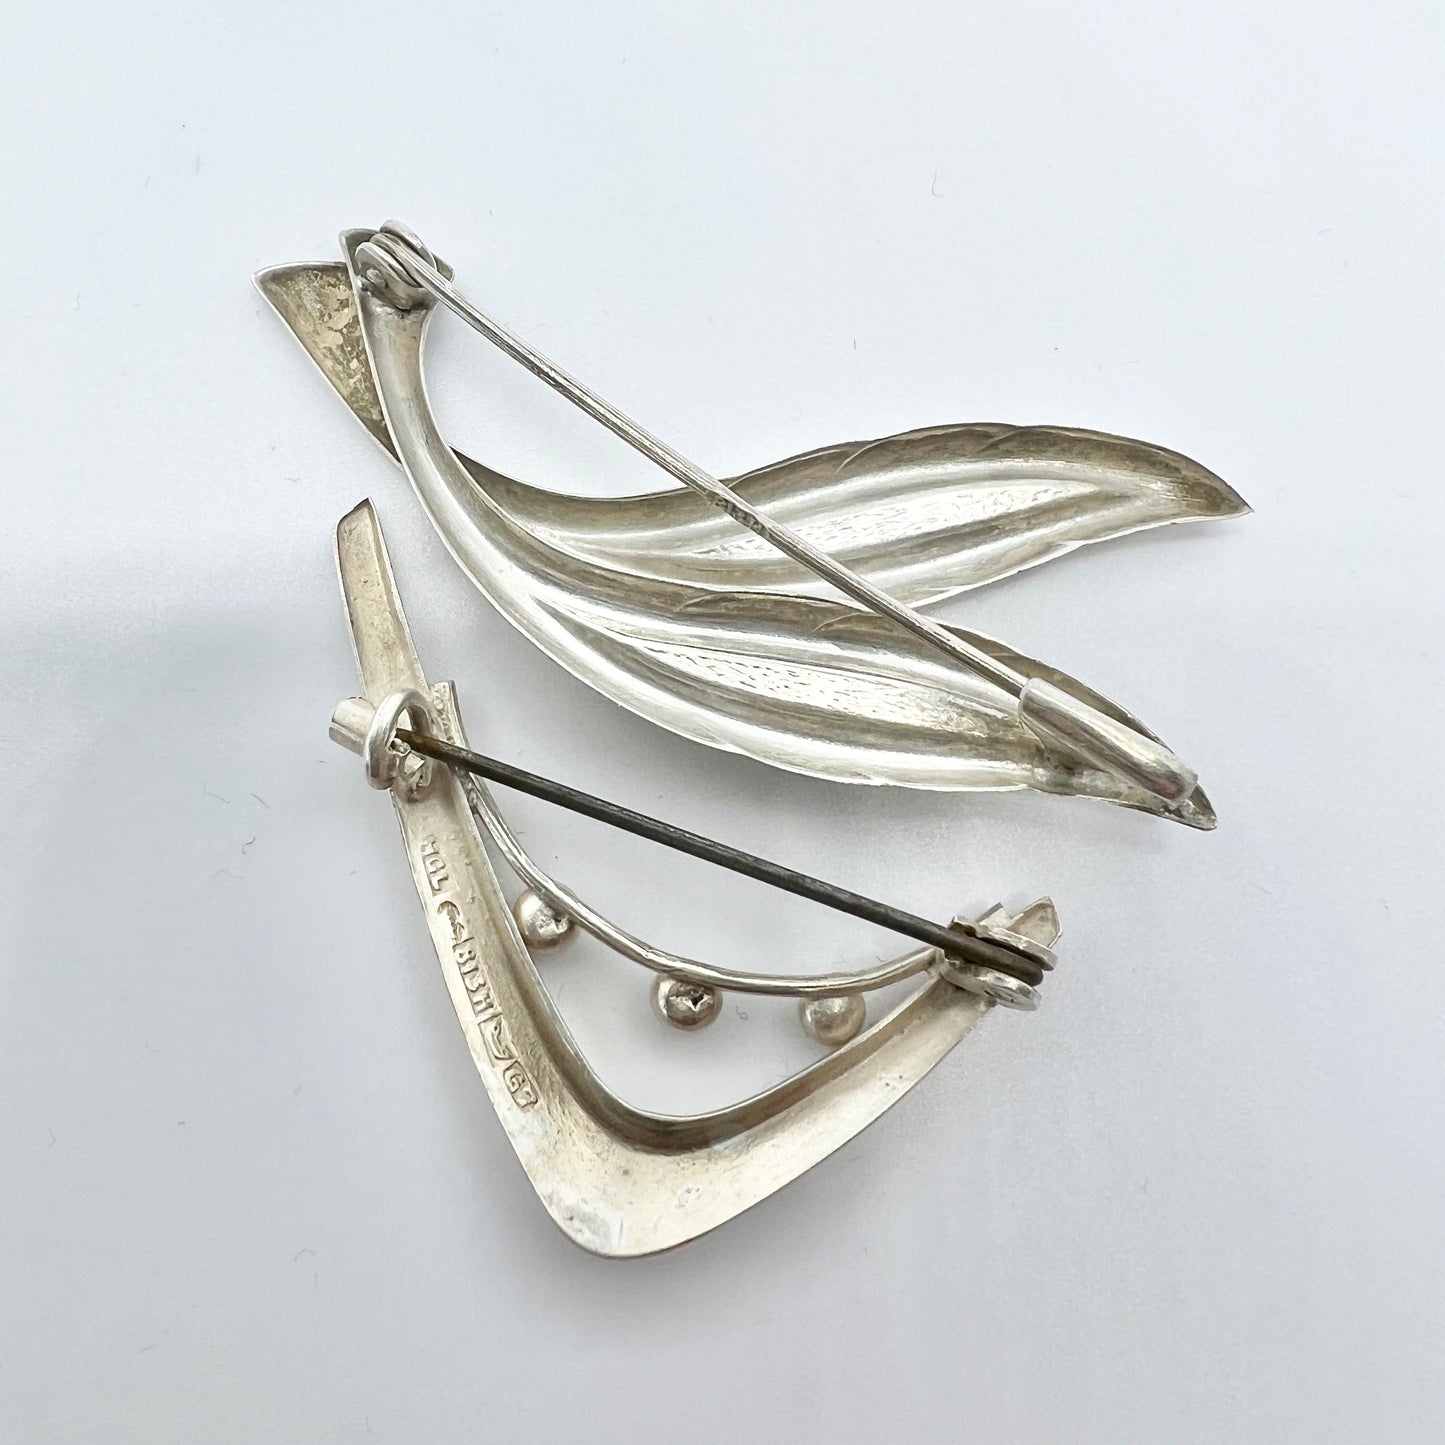 Finland 1950-60s. Two Solid Silver Brooches.